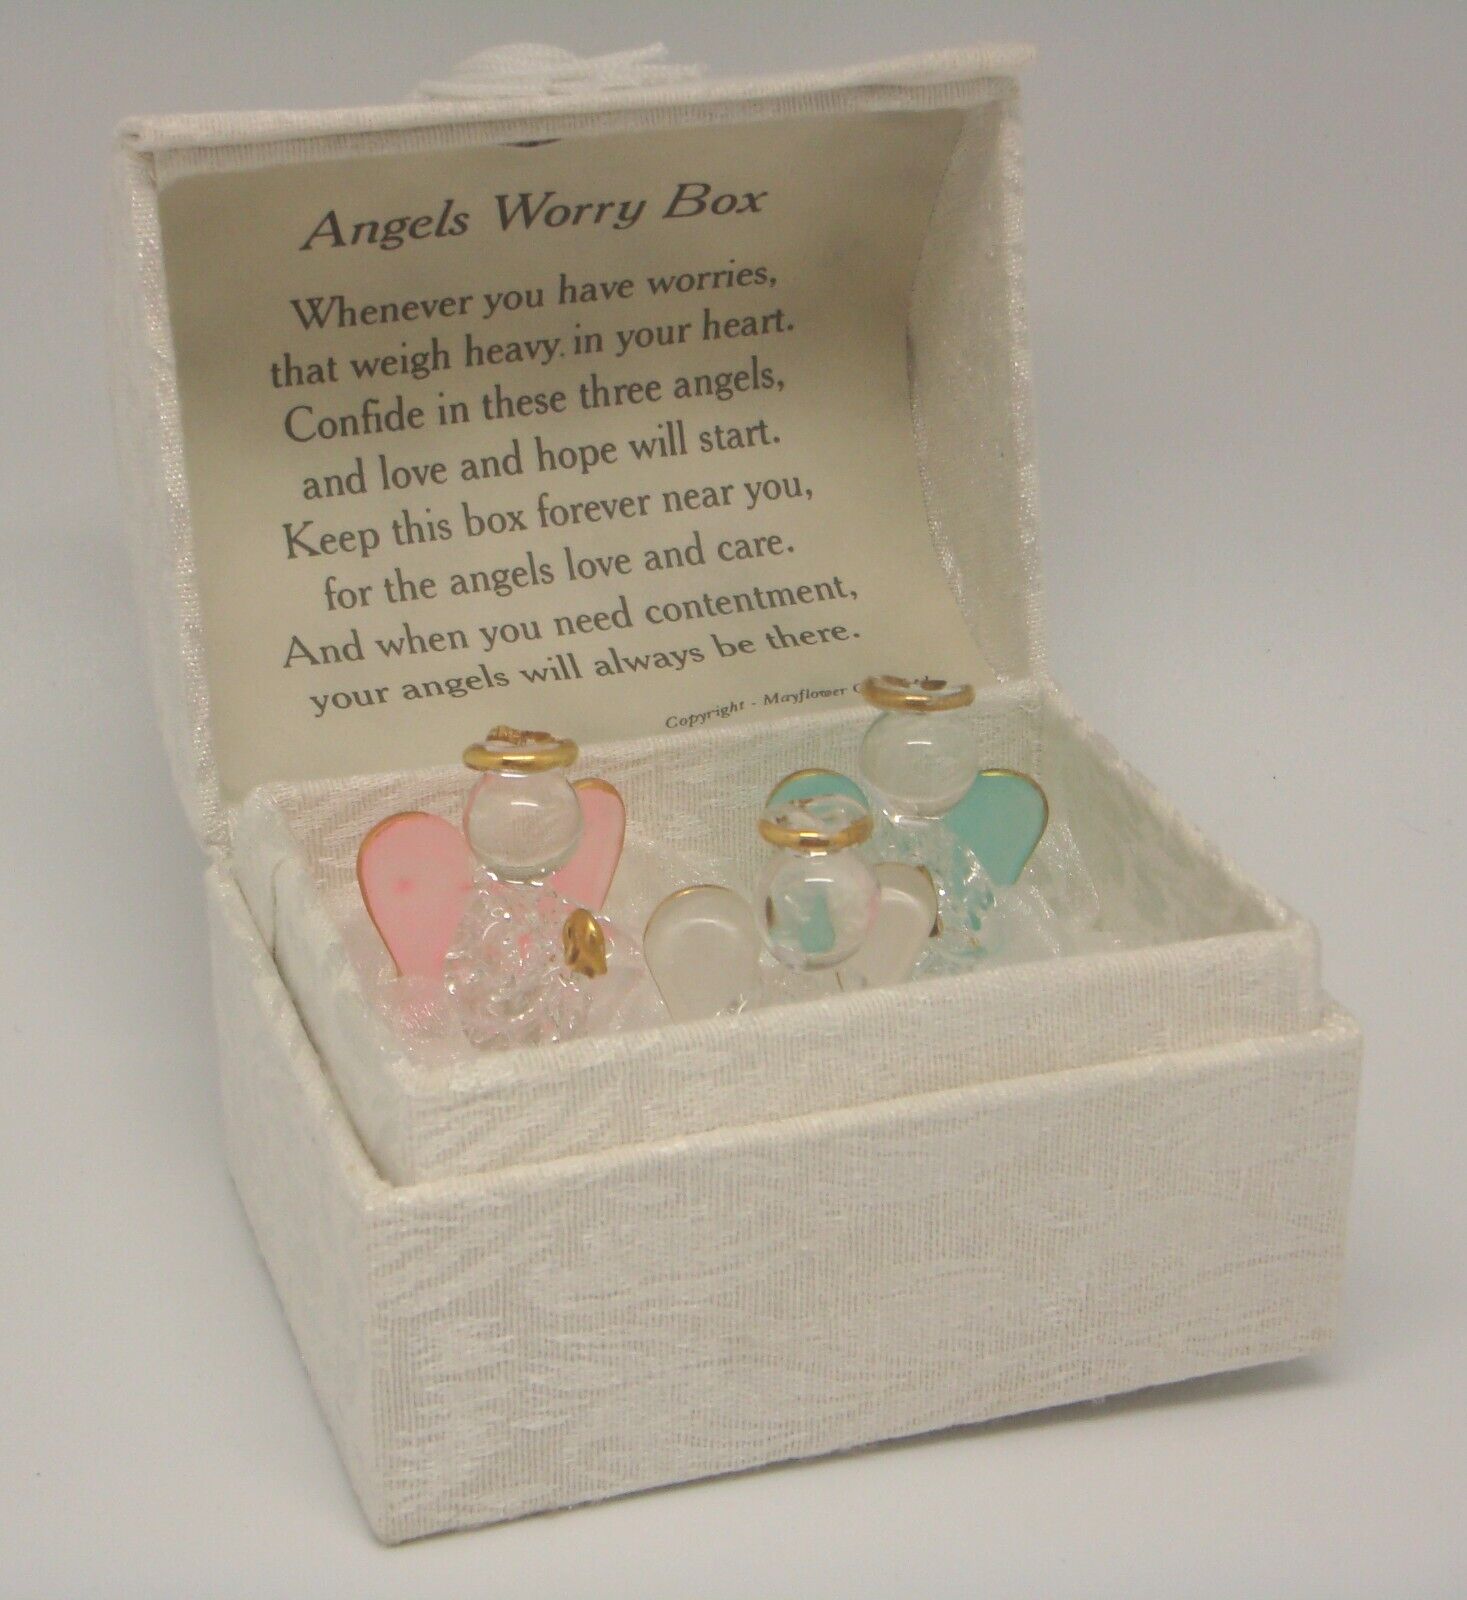 Angel Worry Box 3 Spun Glass Angels with Gold Trim in a Brocade Barrel Chest